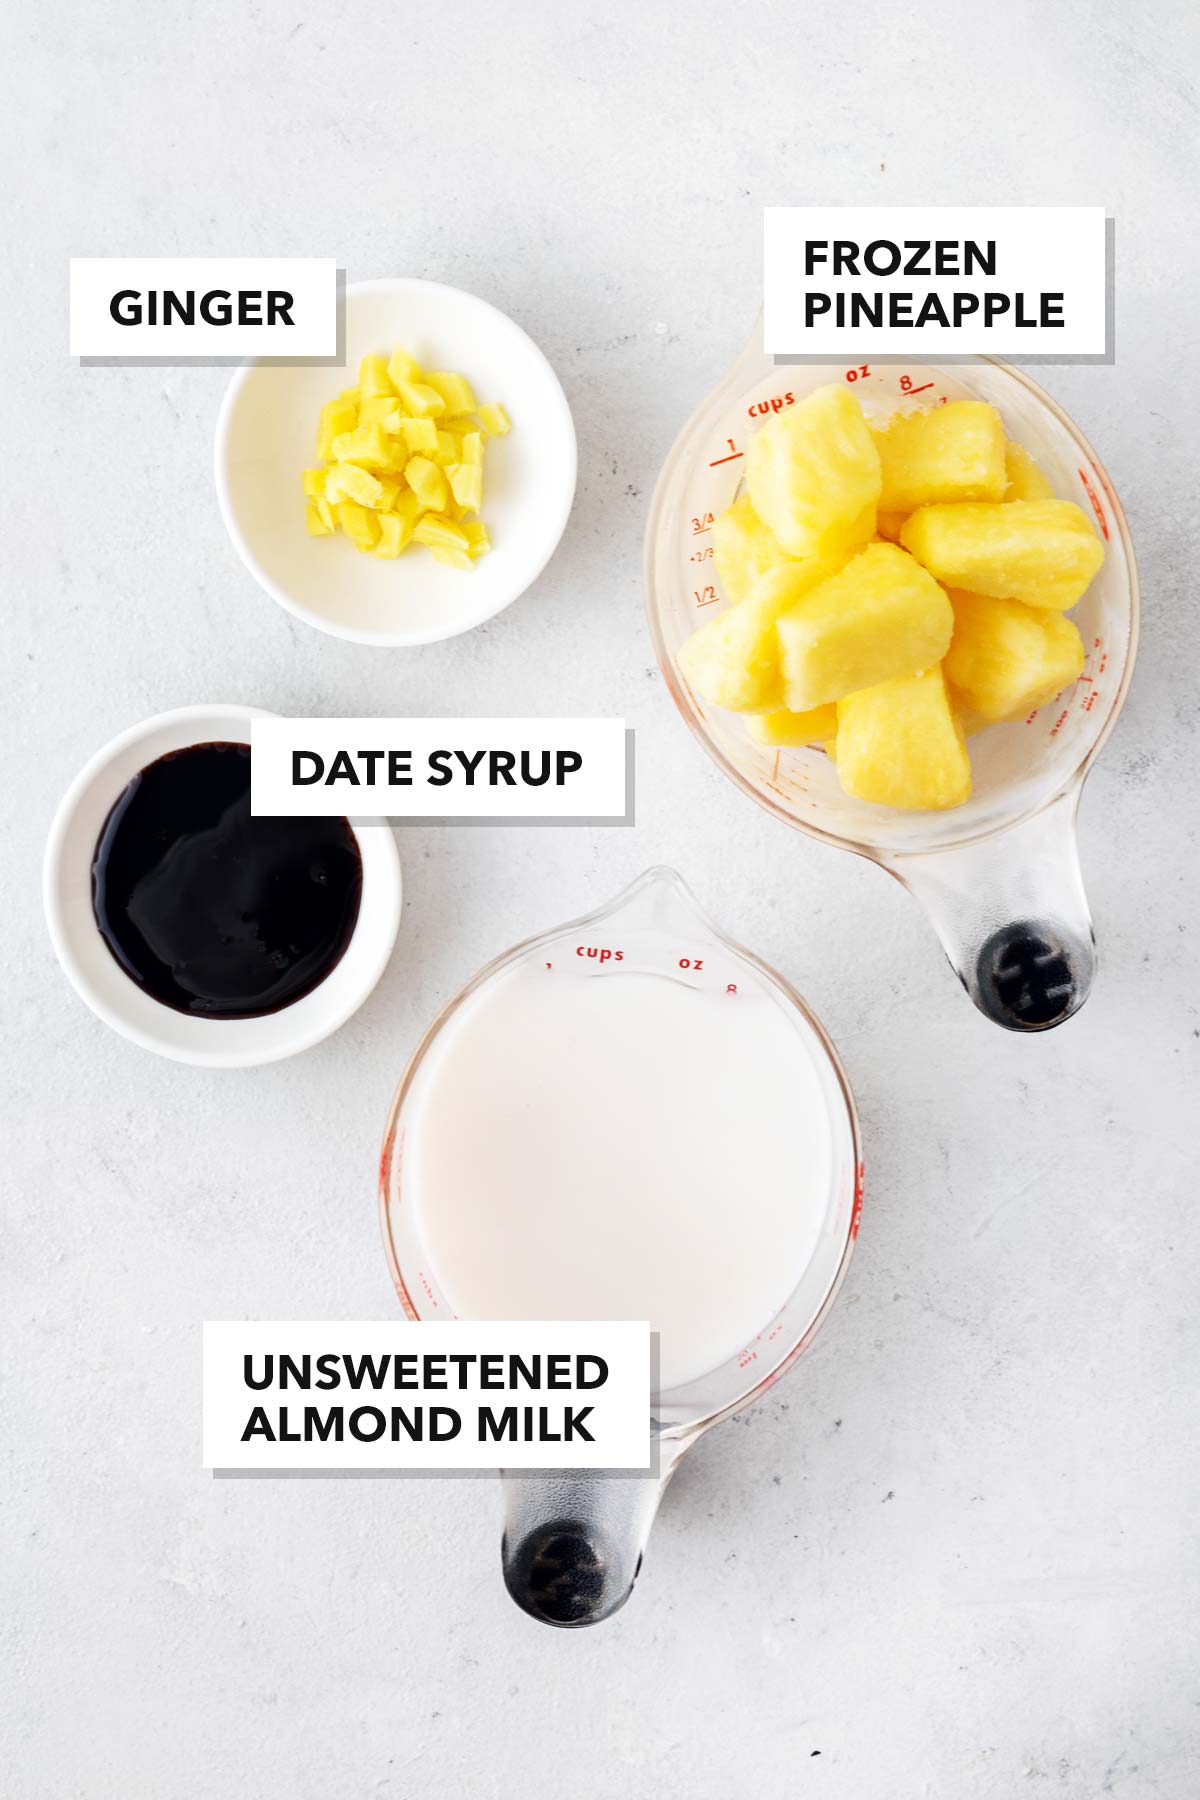 Ingredients for a pineapple ginger smoothie.